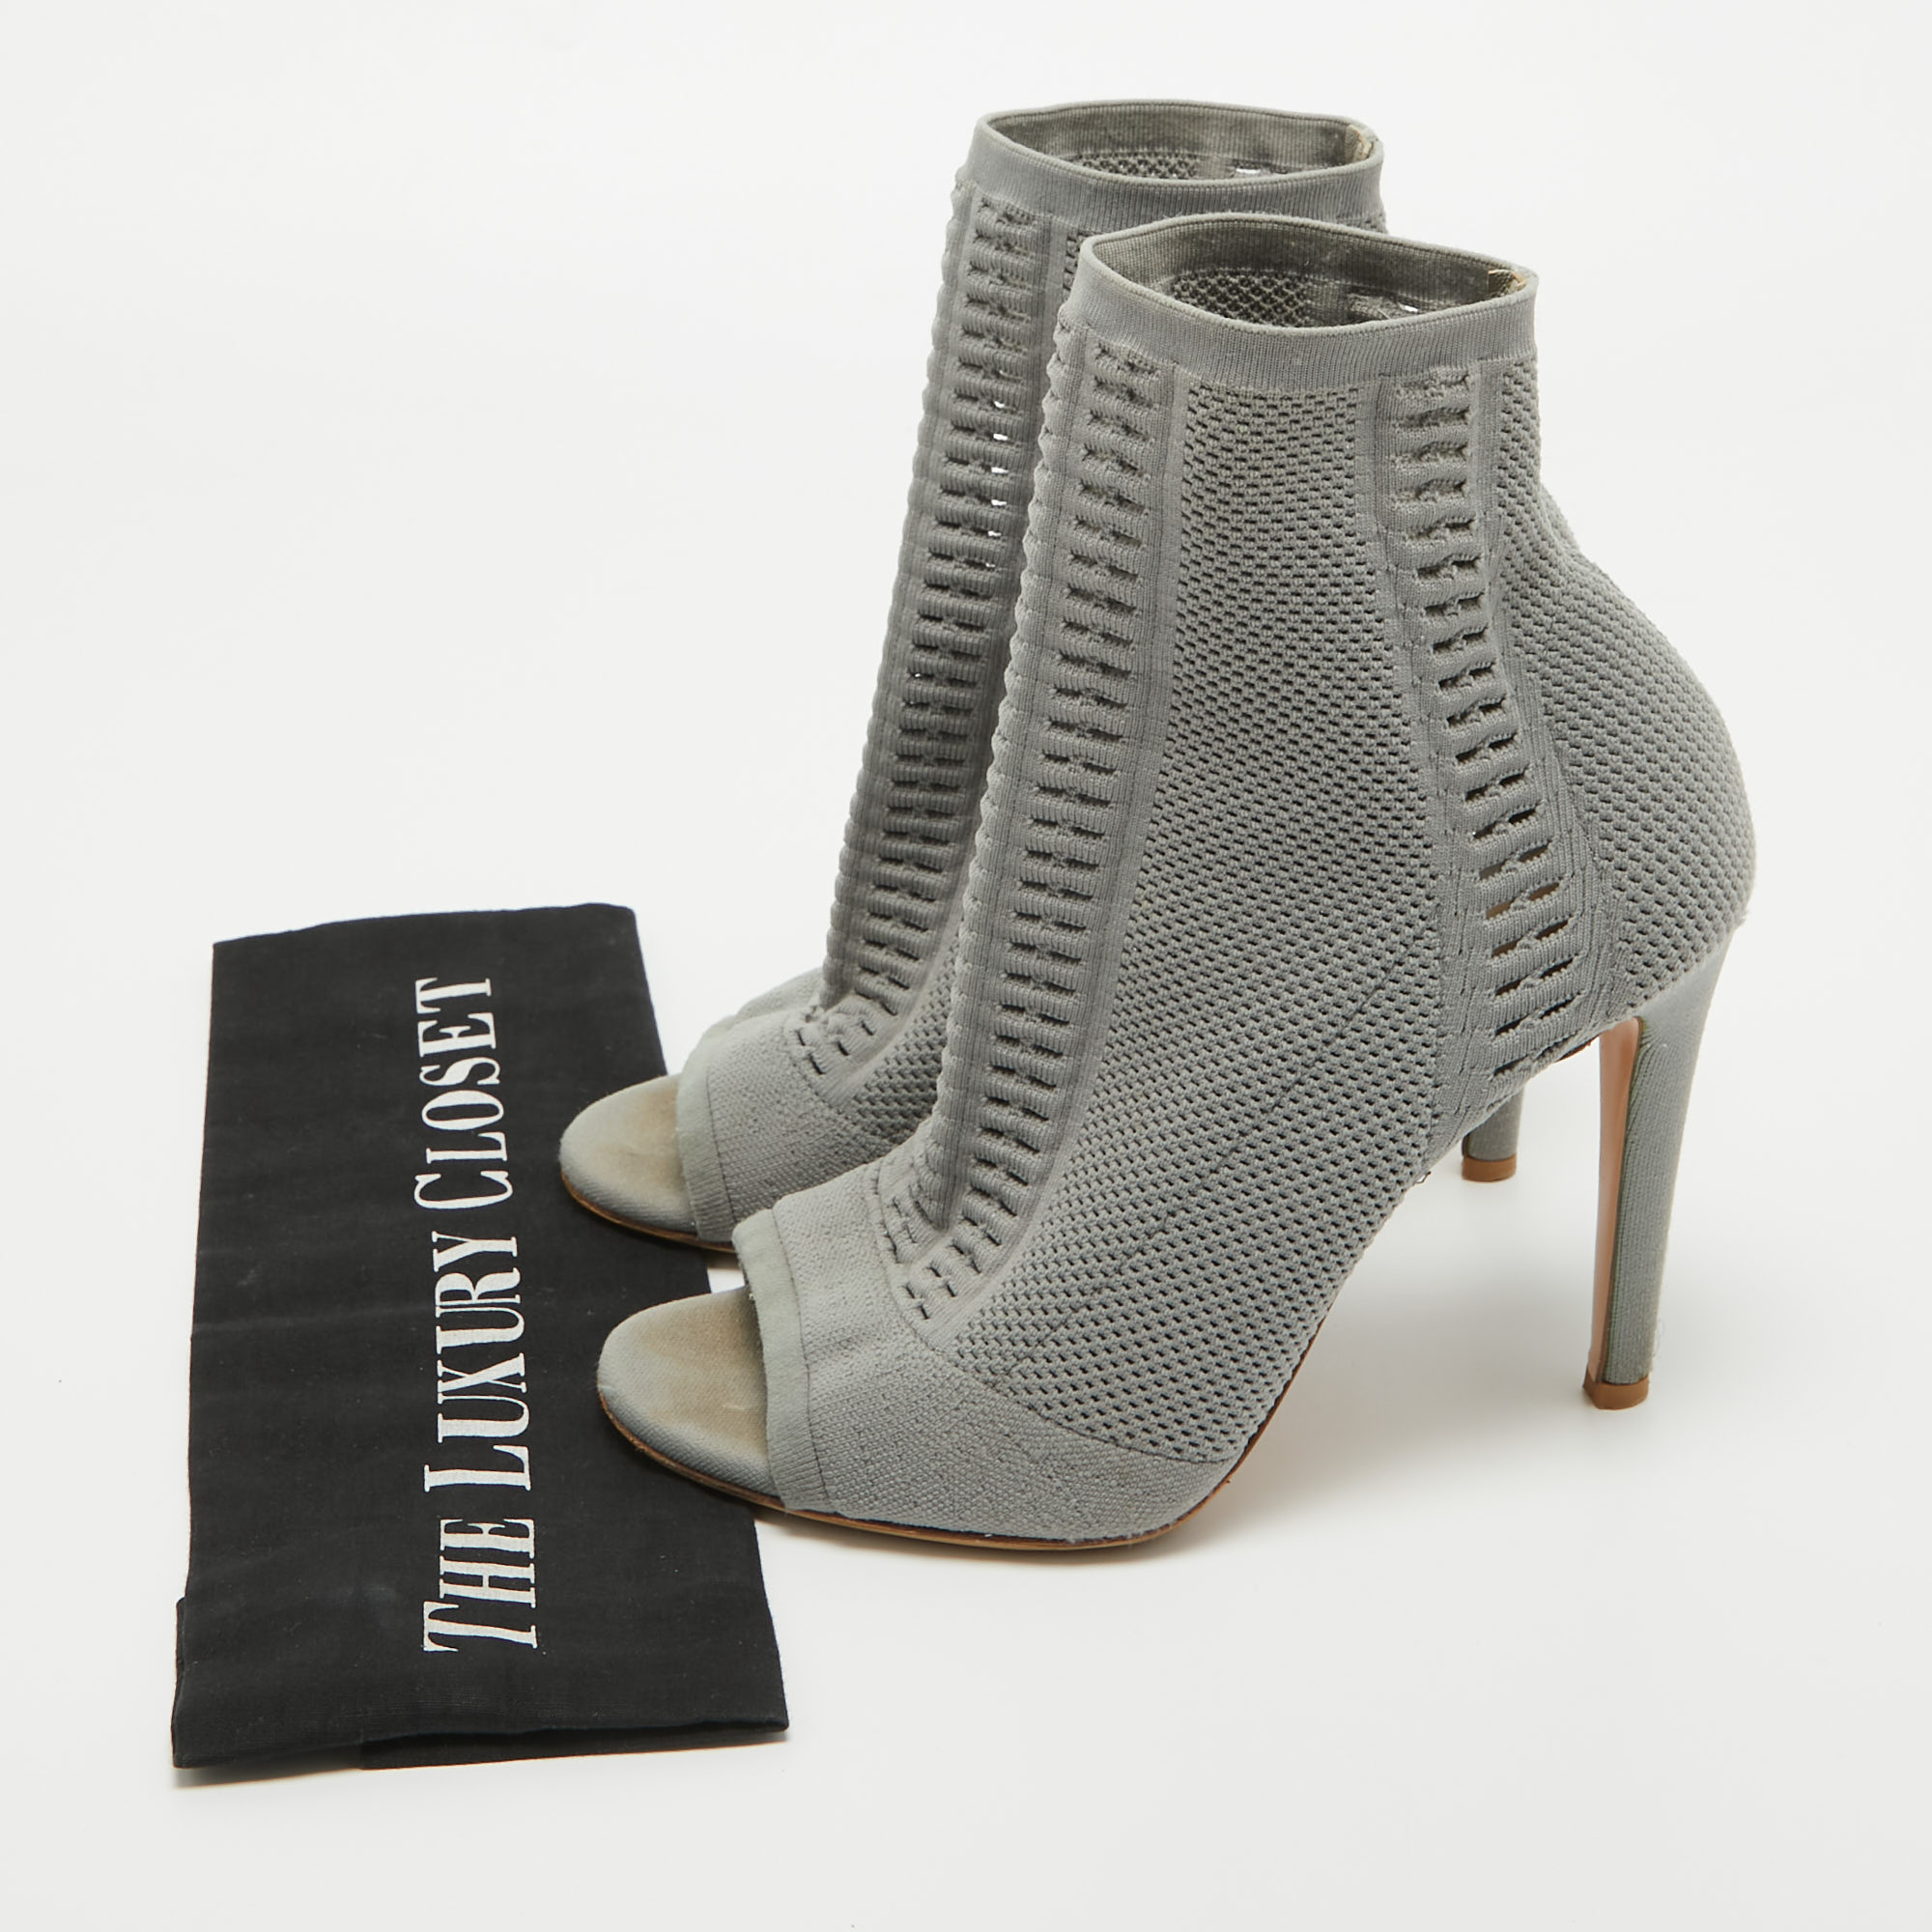 Gianvito Rossi Grey Knit Fabric Open Toe Ankle Boots Size 38